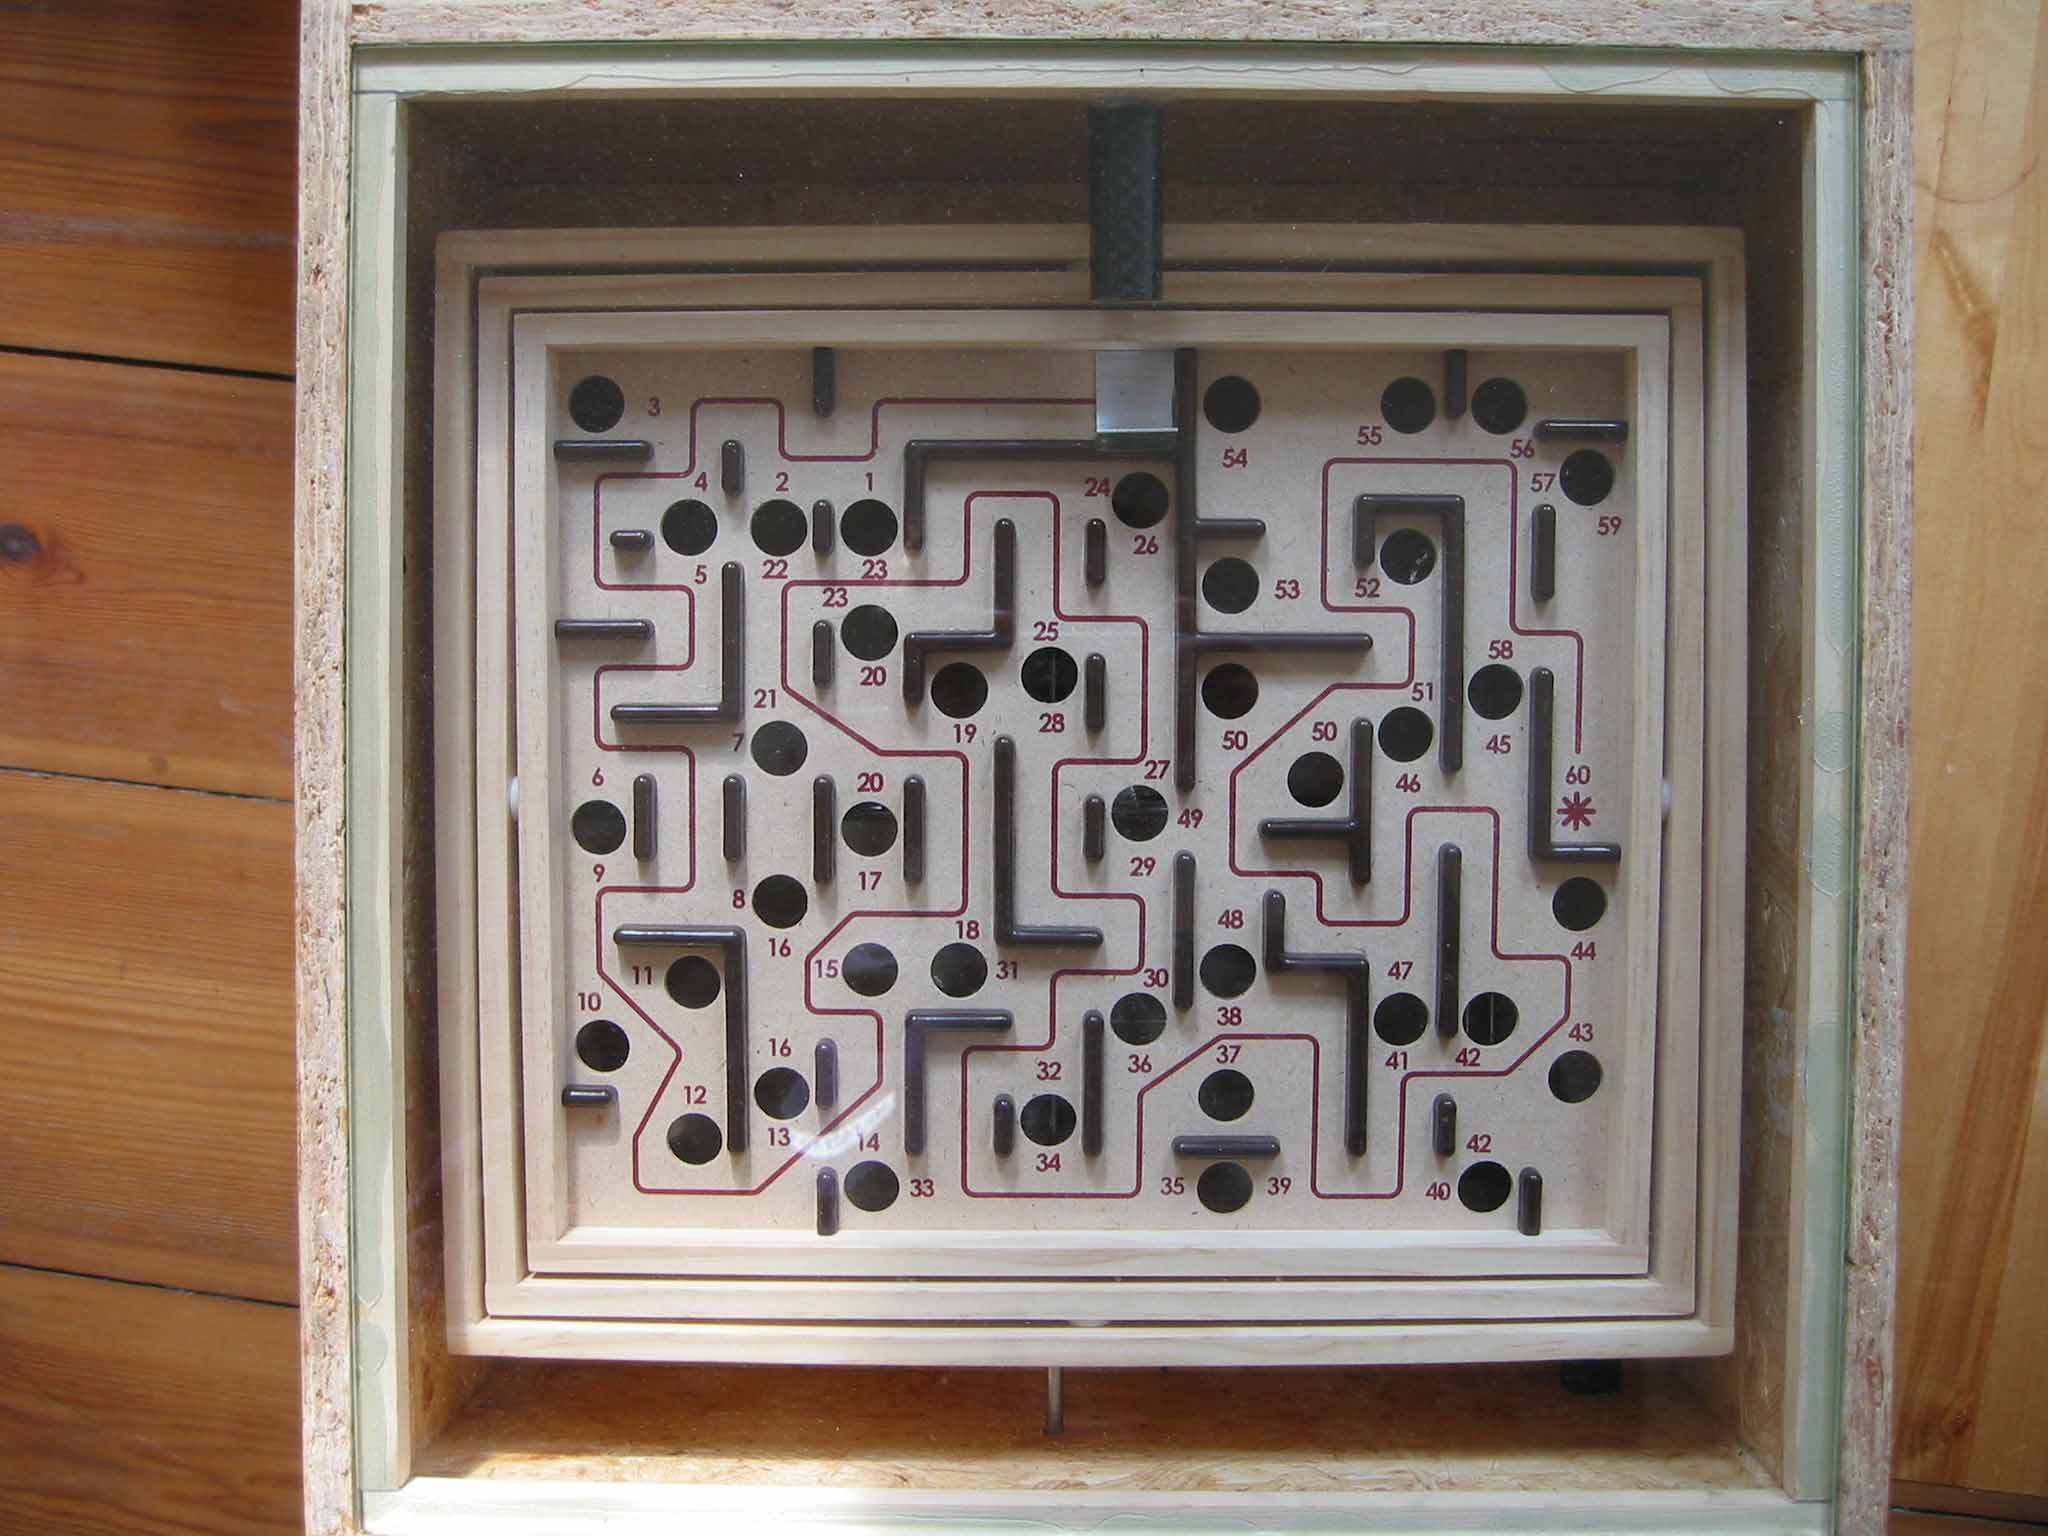 Top view of the labyrinth with contact rods mounted below hole 42